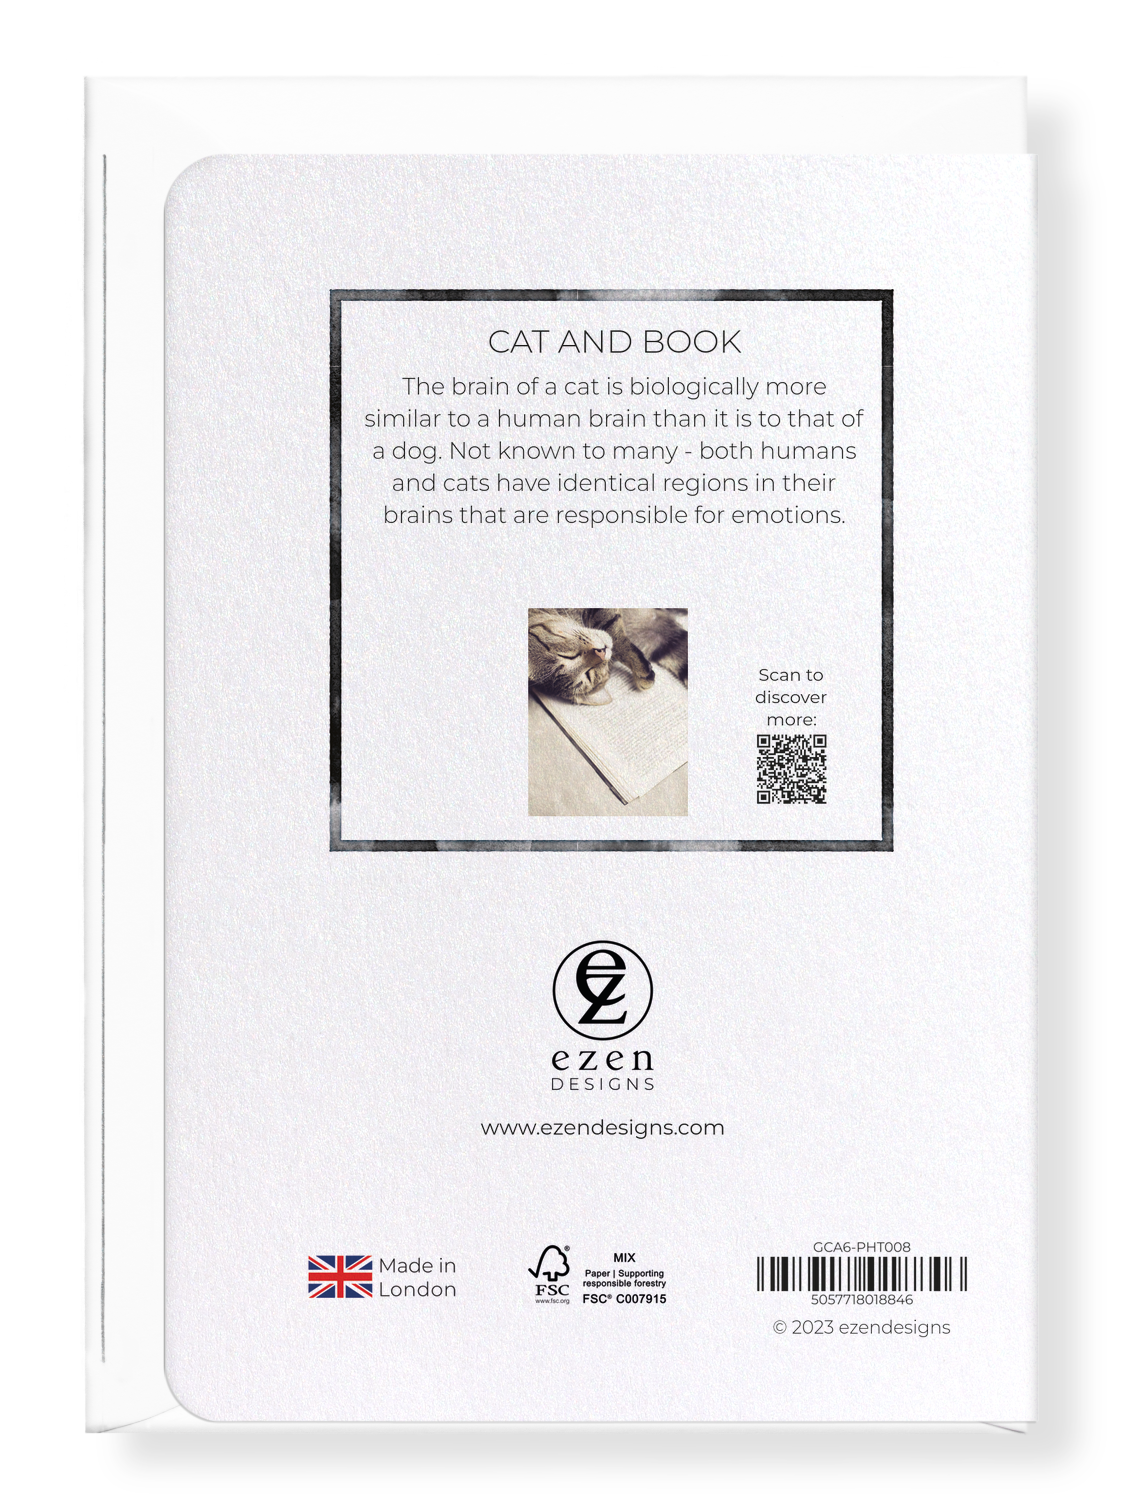 Ezen Designs - Cat and book - Greeting Card - Back